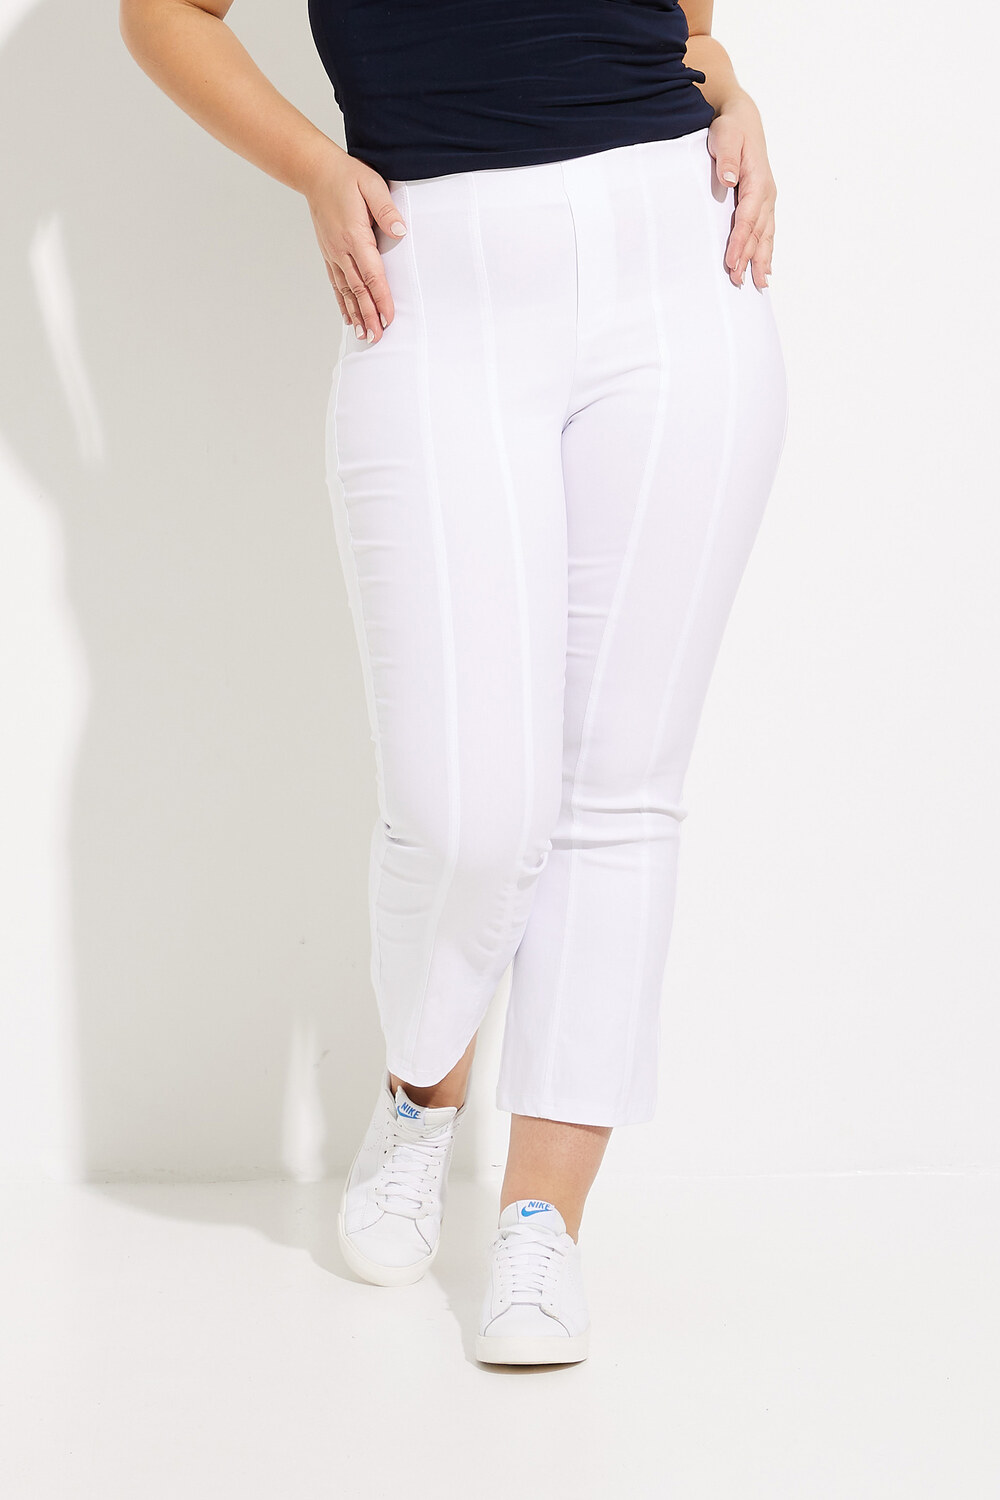 Pintuck Flared Pants Style 232233. White